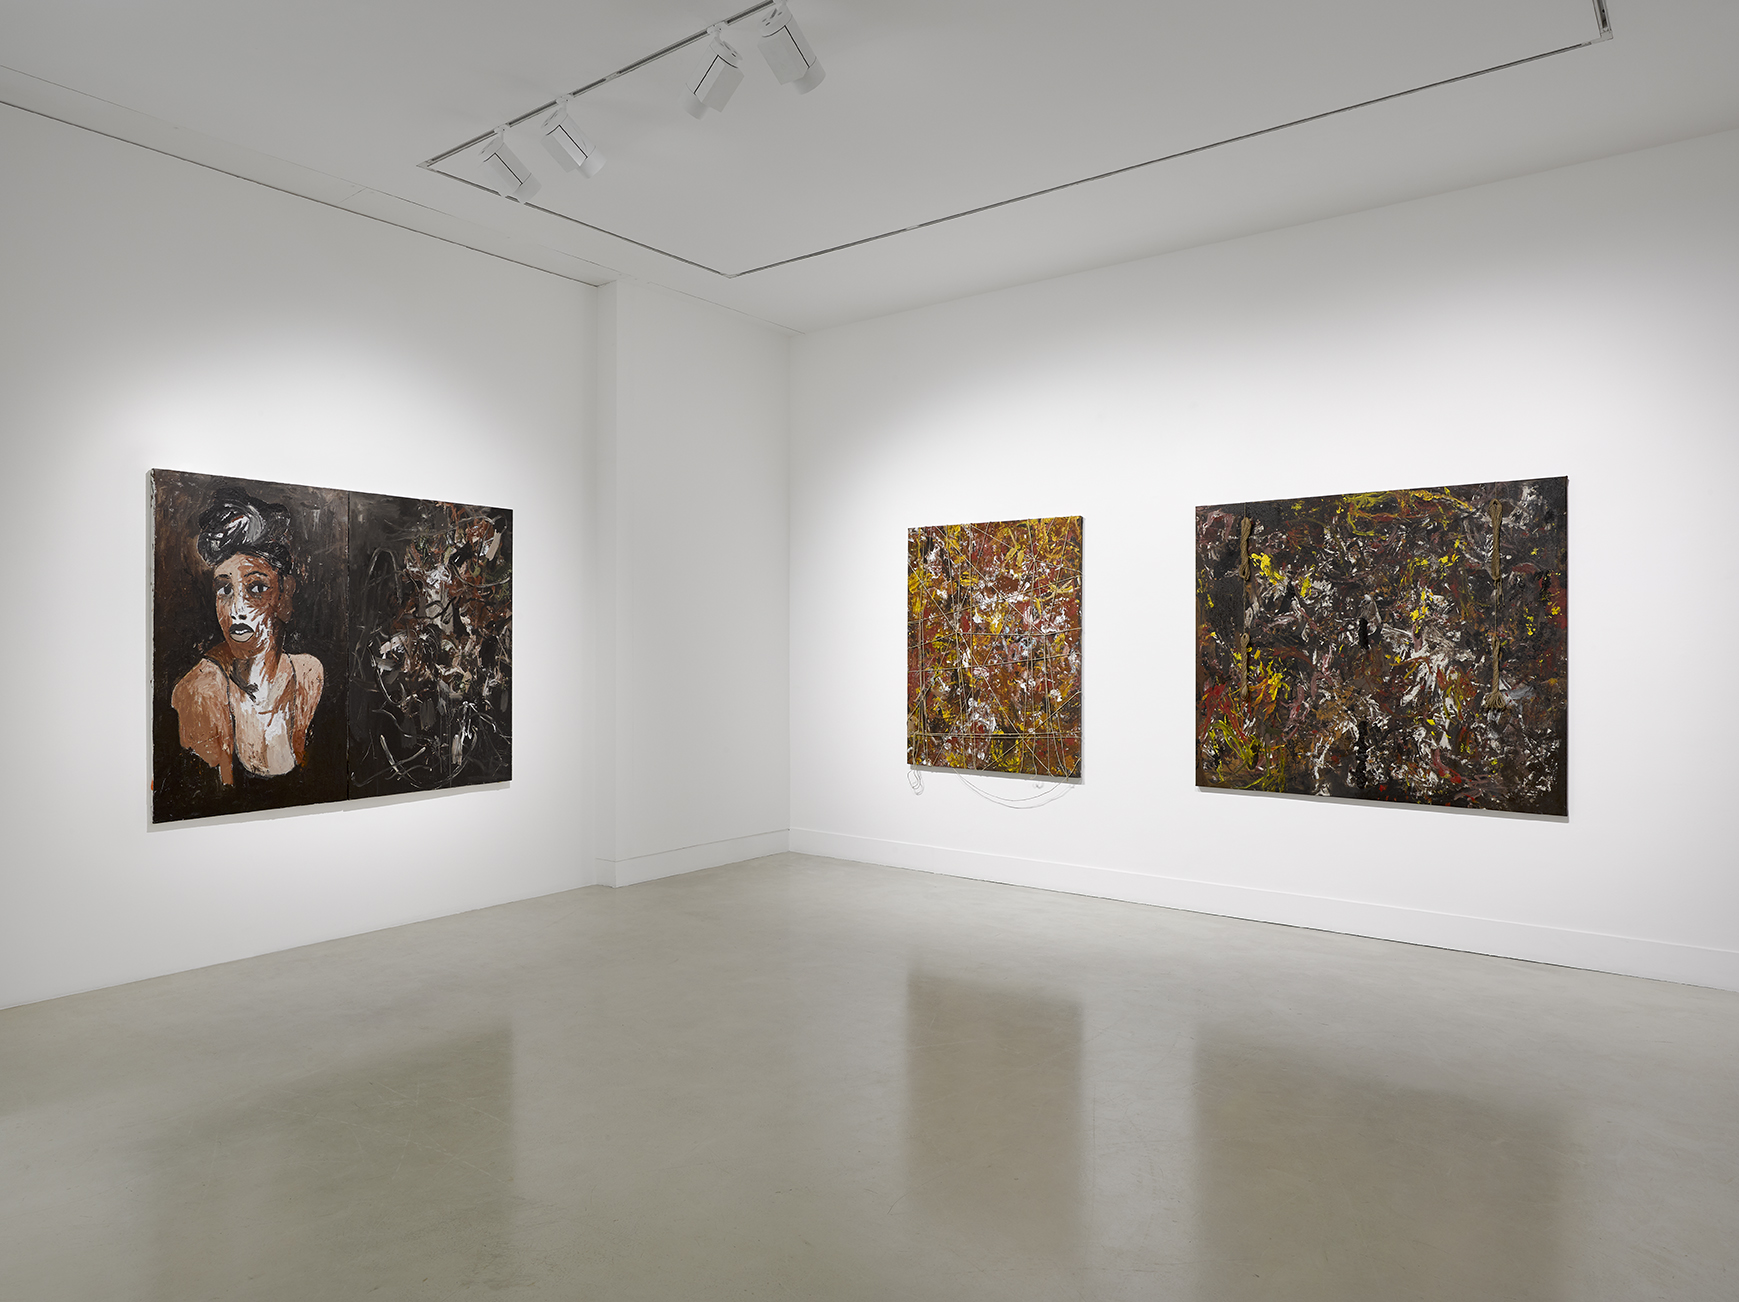 Reginald Sylvester II | 'With the End in Mind' - Maximillian William Gallery, London, UK | 9